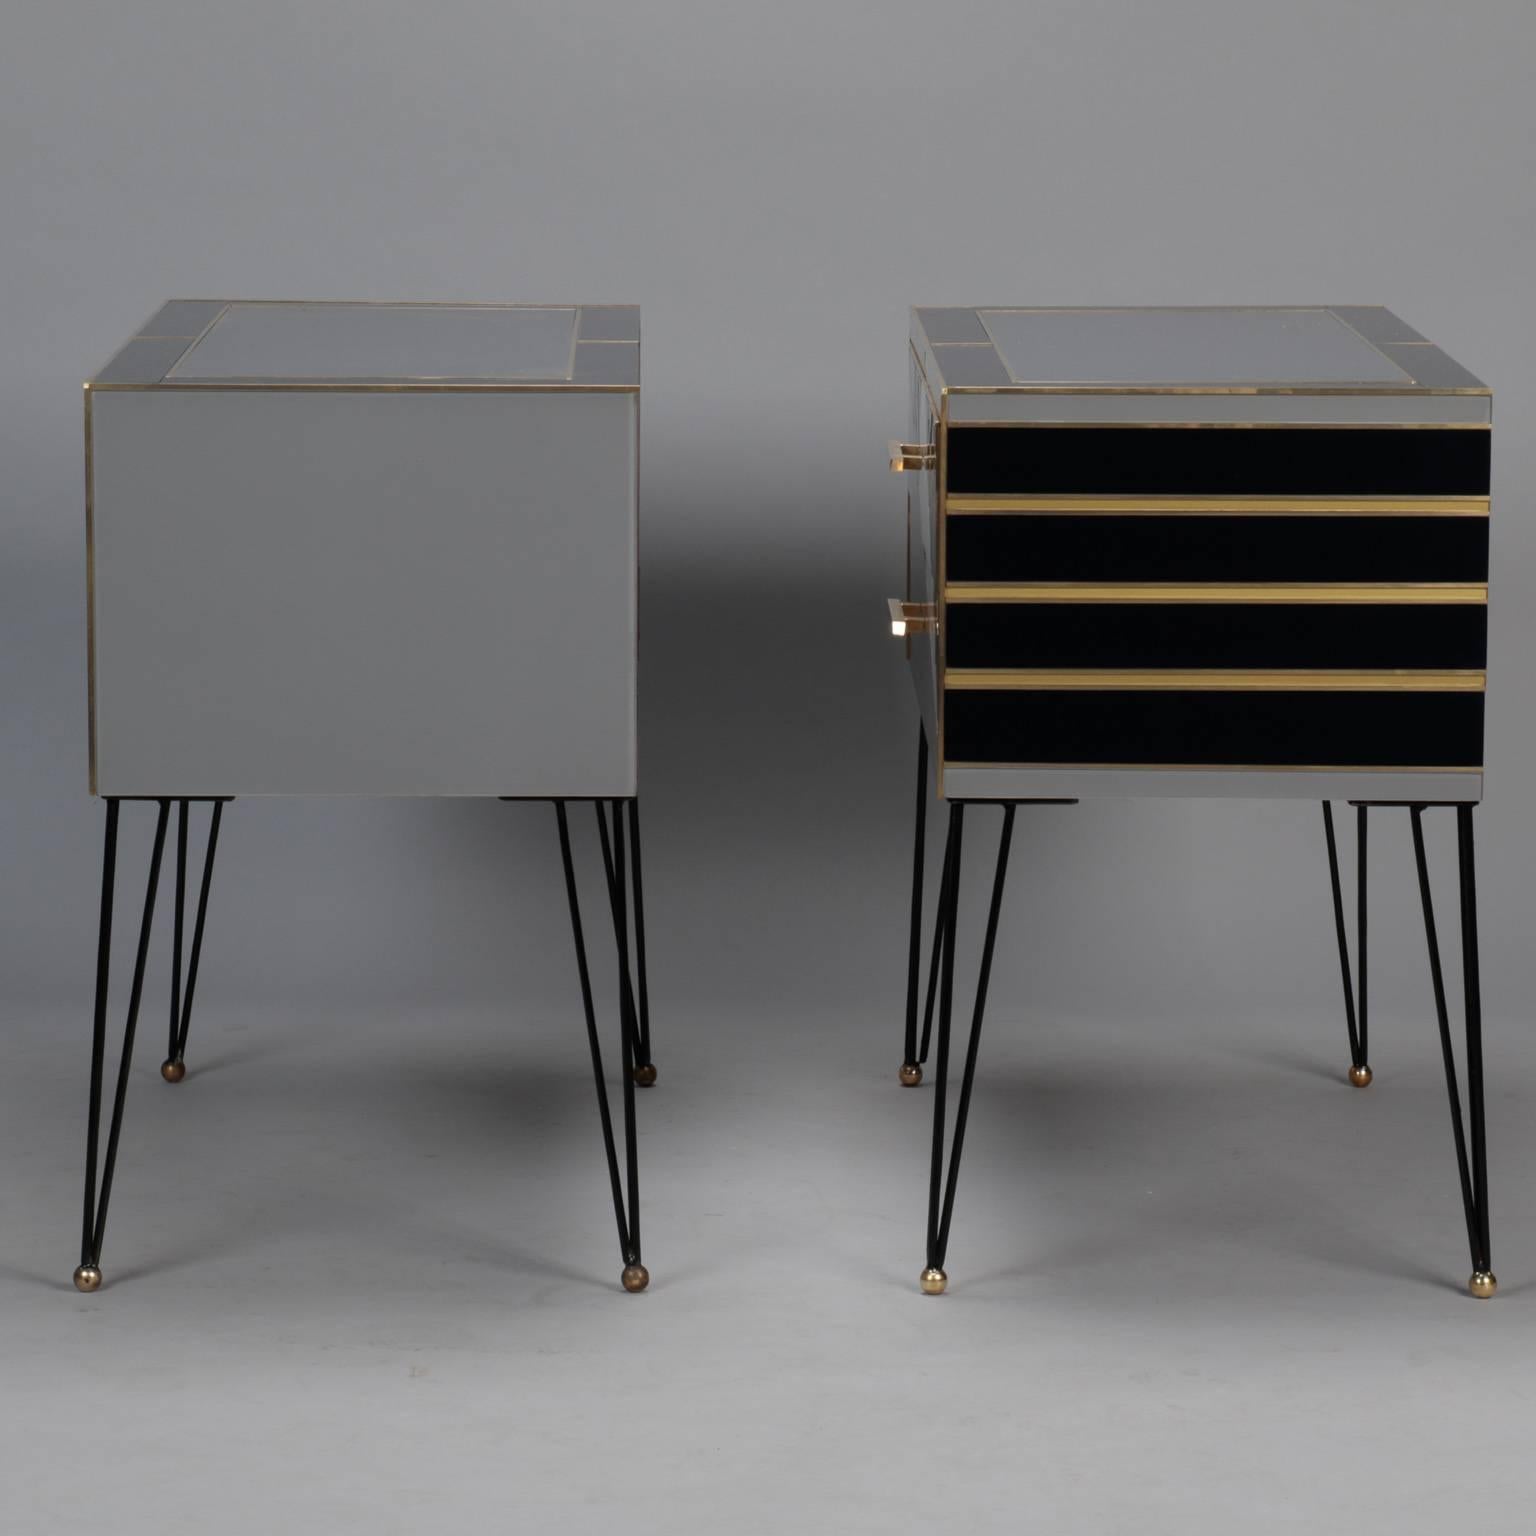 20th Century Pair of Italian Two-Drawer Cabinets with Murano Glass and Brass Inlays